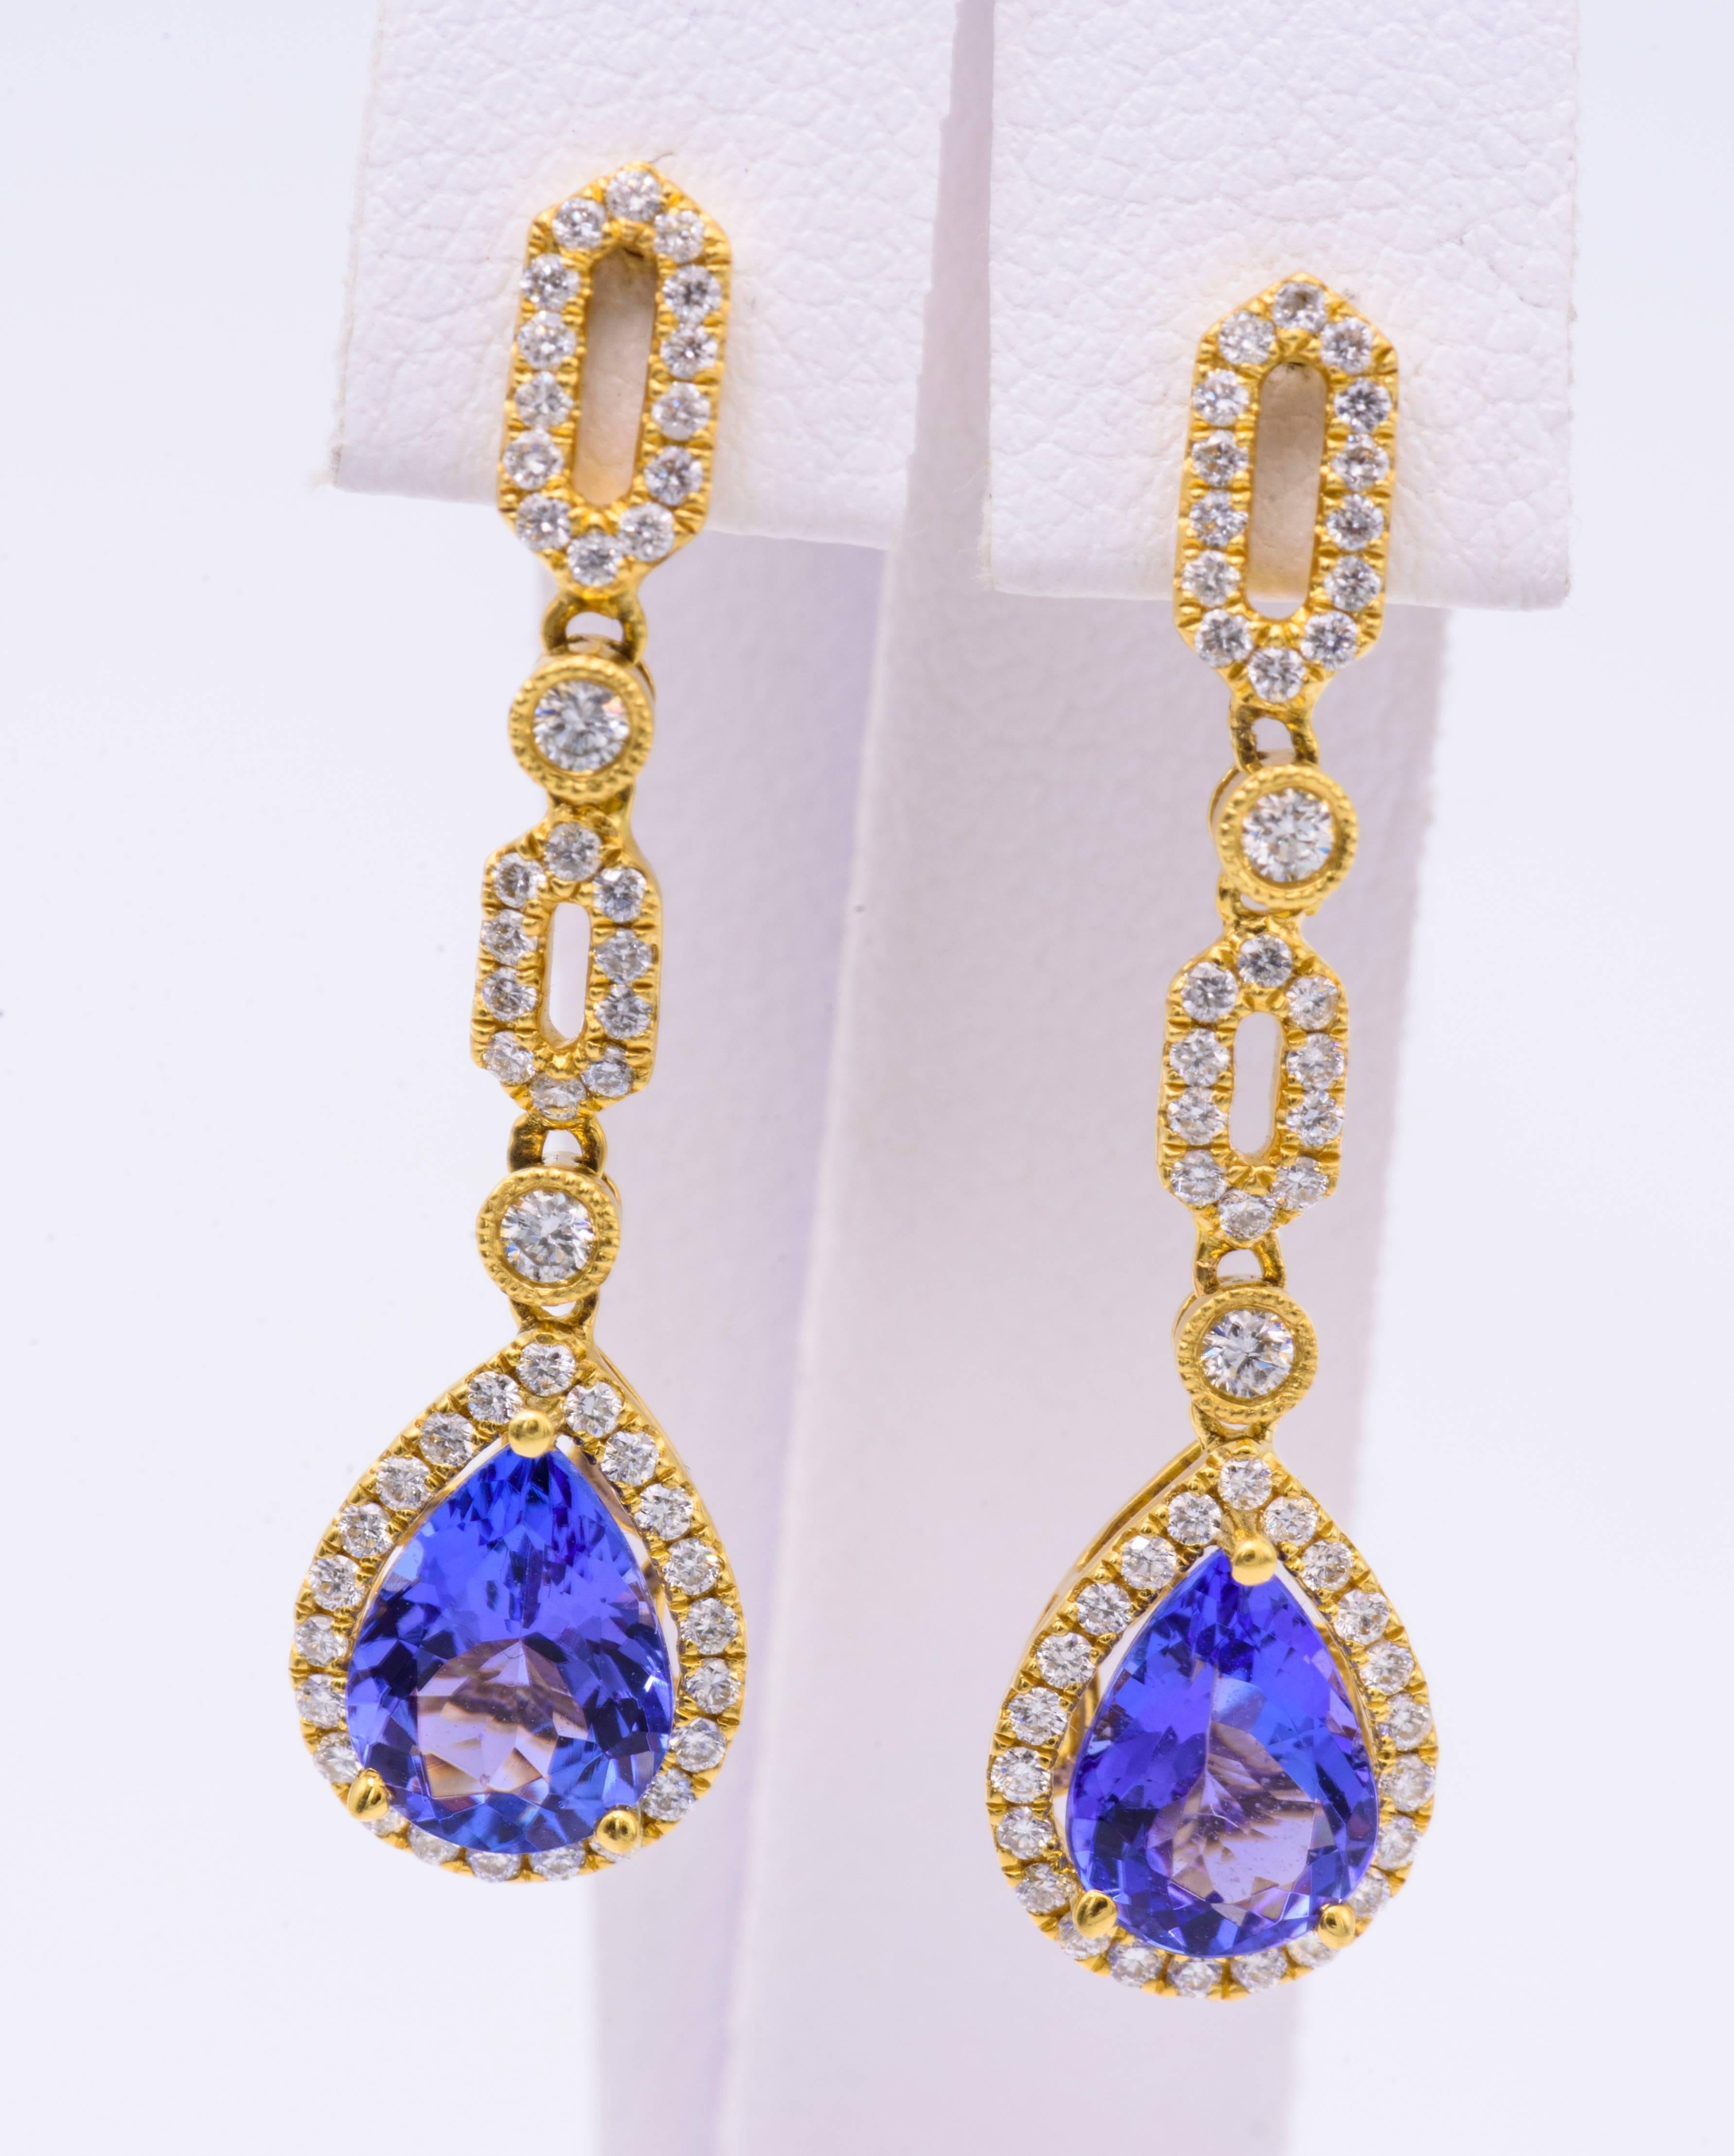 Pear Shape Tanzanite measuring each 8 x 6 mm for a total weight of 2.10 Cts.
Diamond Weight: 0.47 Cts.
Earring measuring 32 x 9 mm